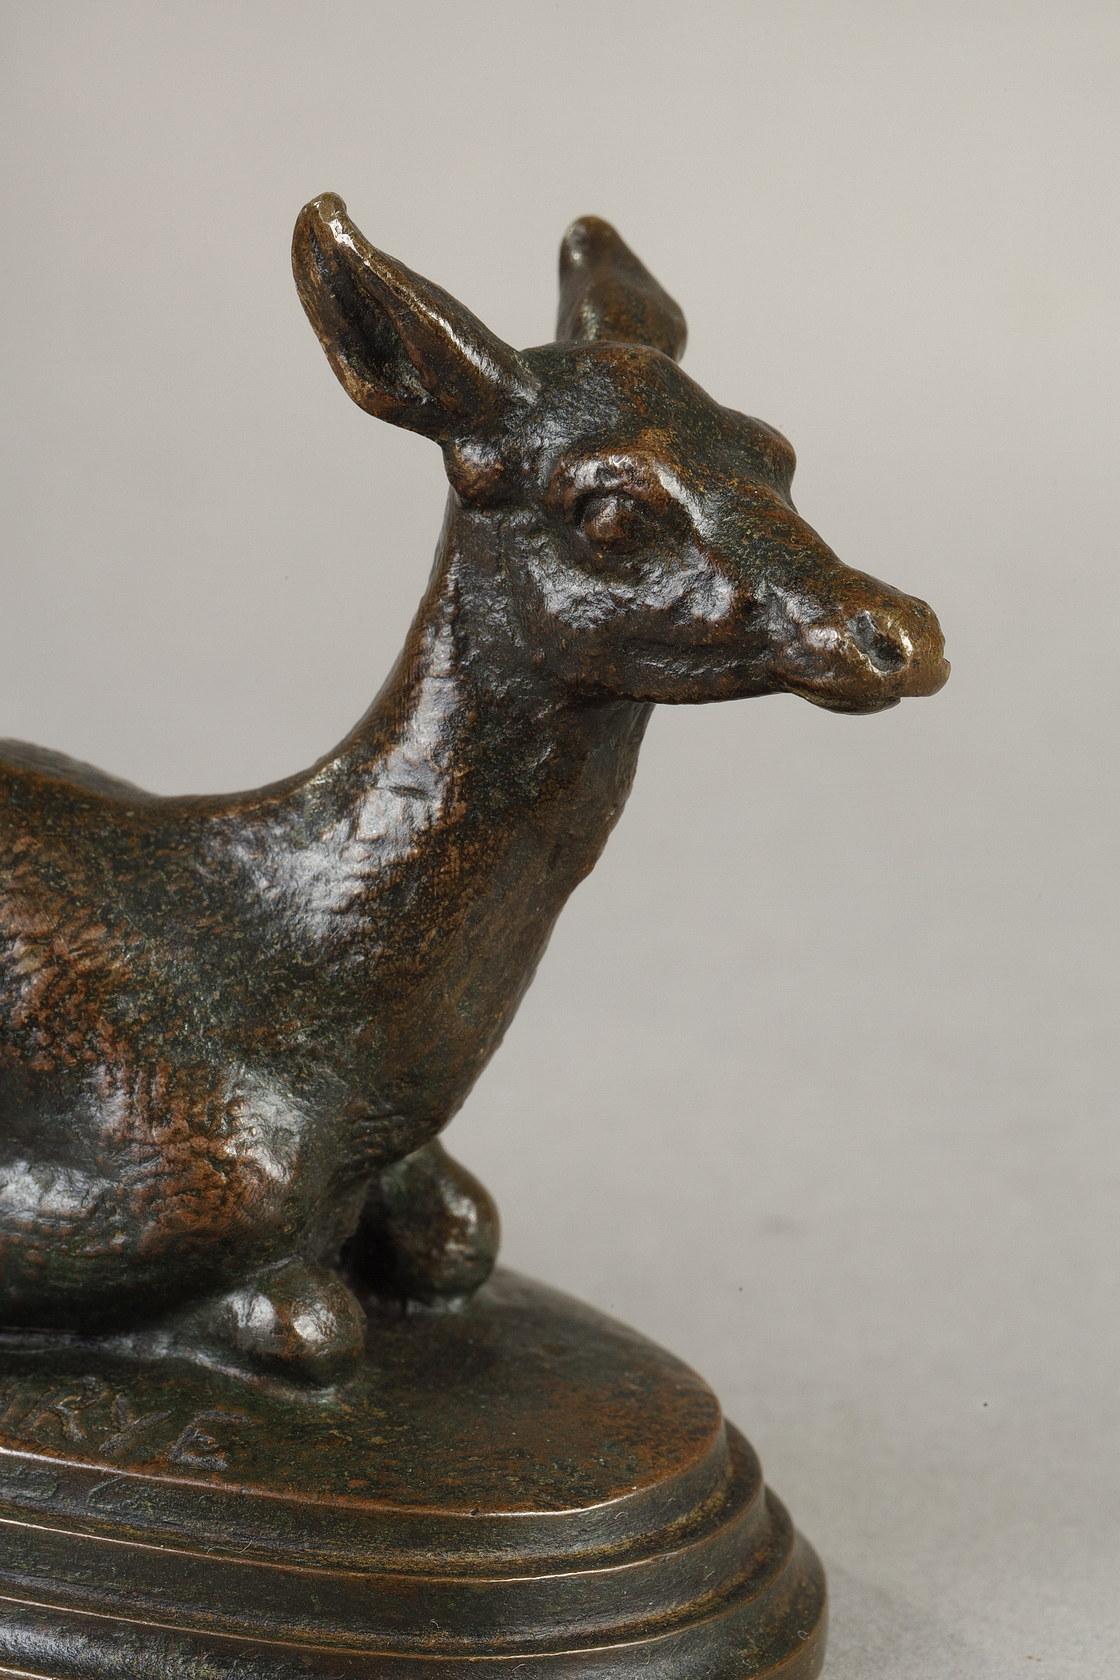 Reclining Doe
by Antoine-Louis Barye (1796-1875)

Bronze sculpture with a nuanced dark brown patina
signed 